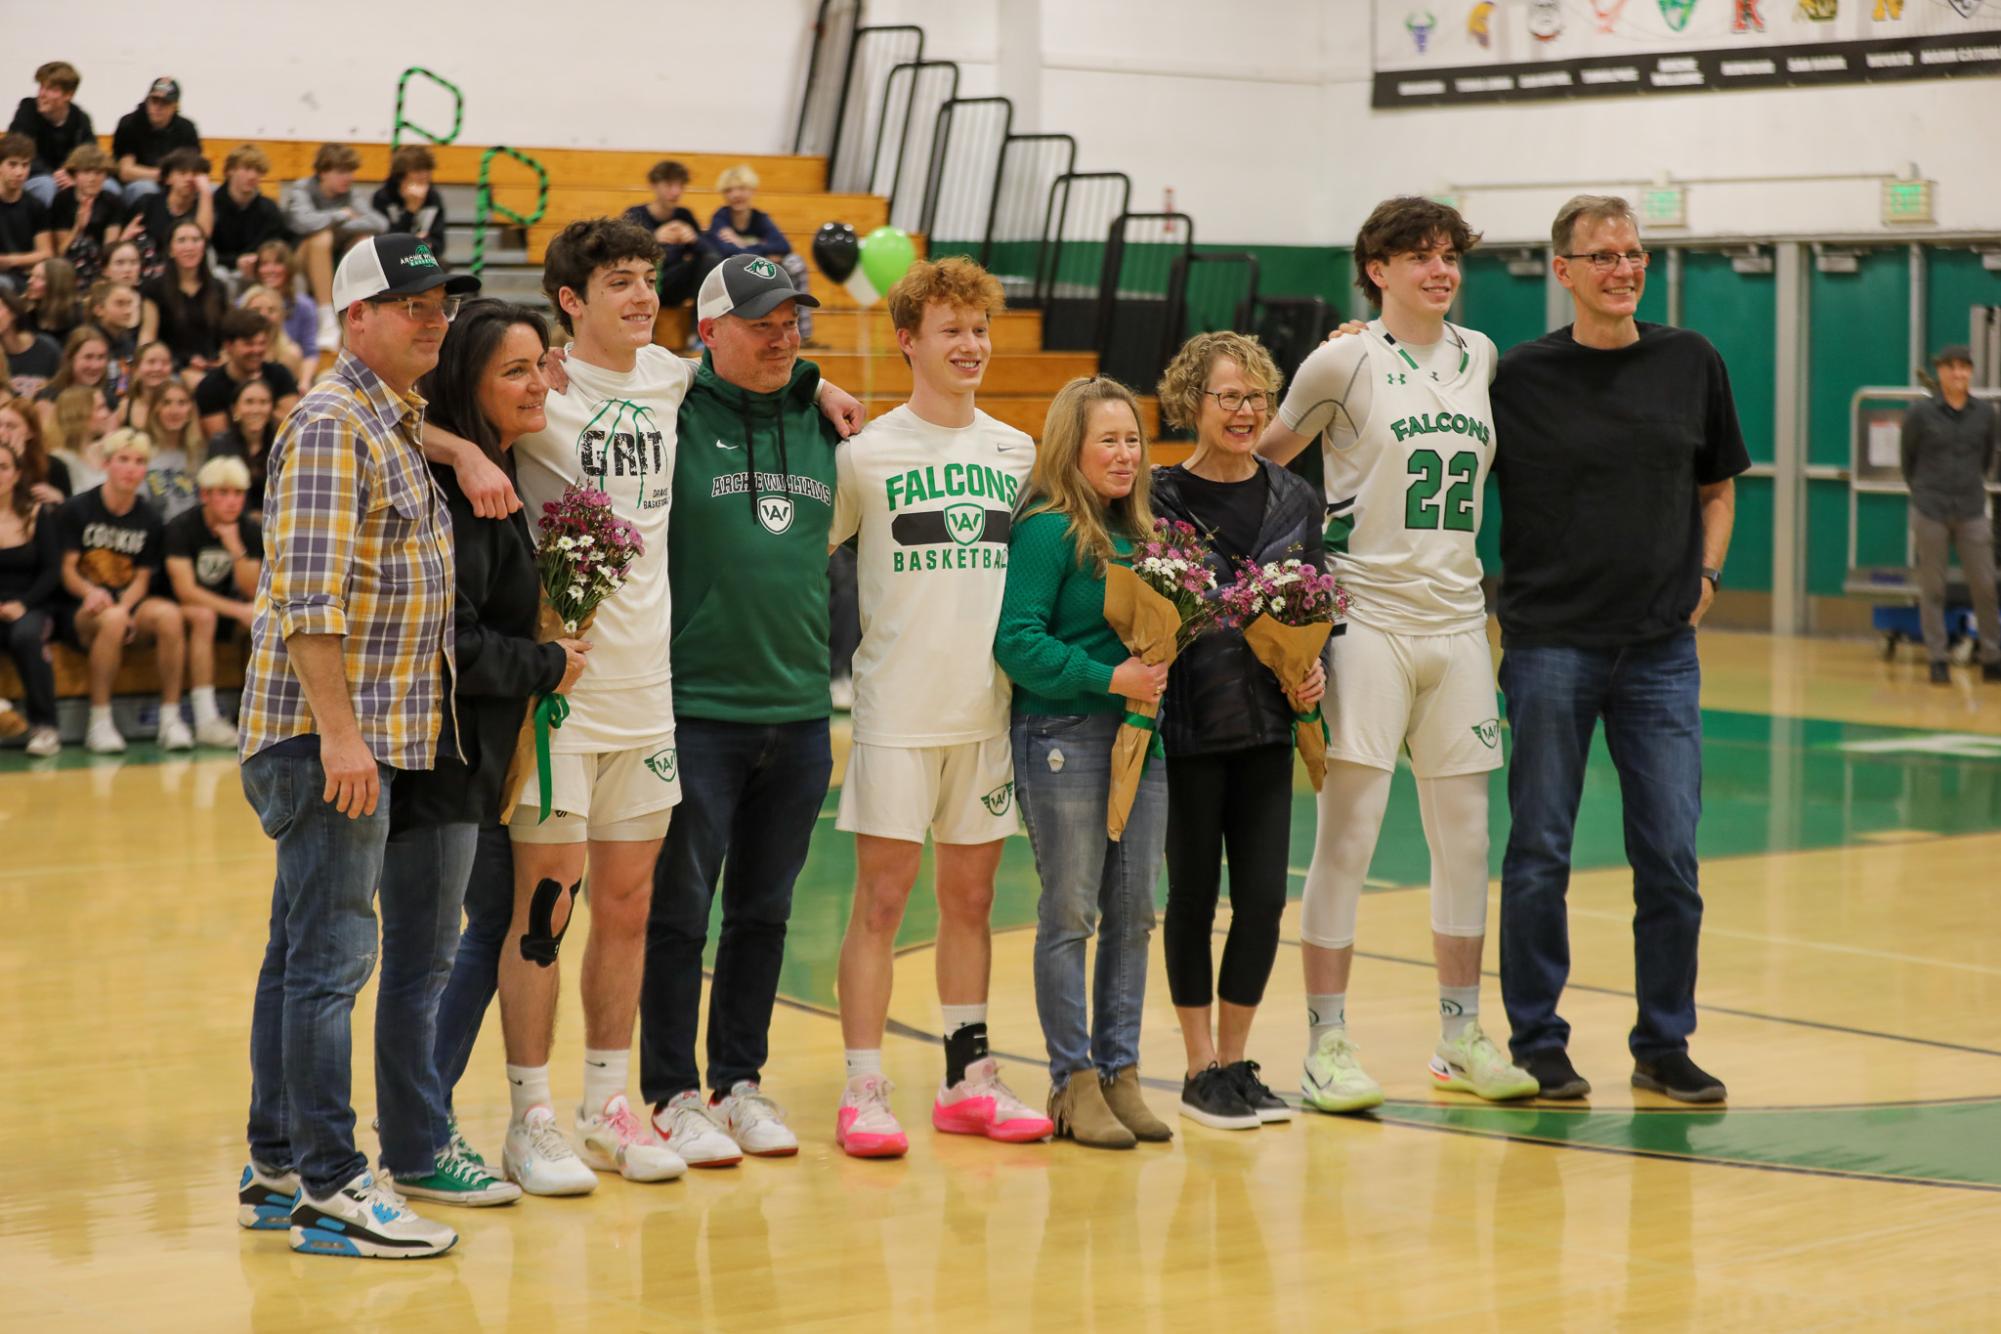 The seniors of the varsity boys basketball team line up for a photo with their parents.